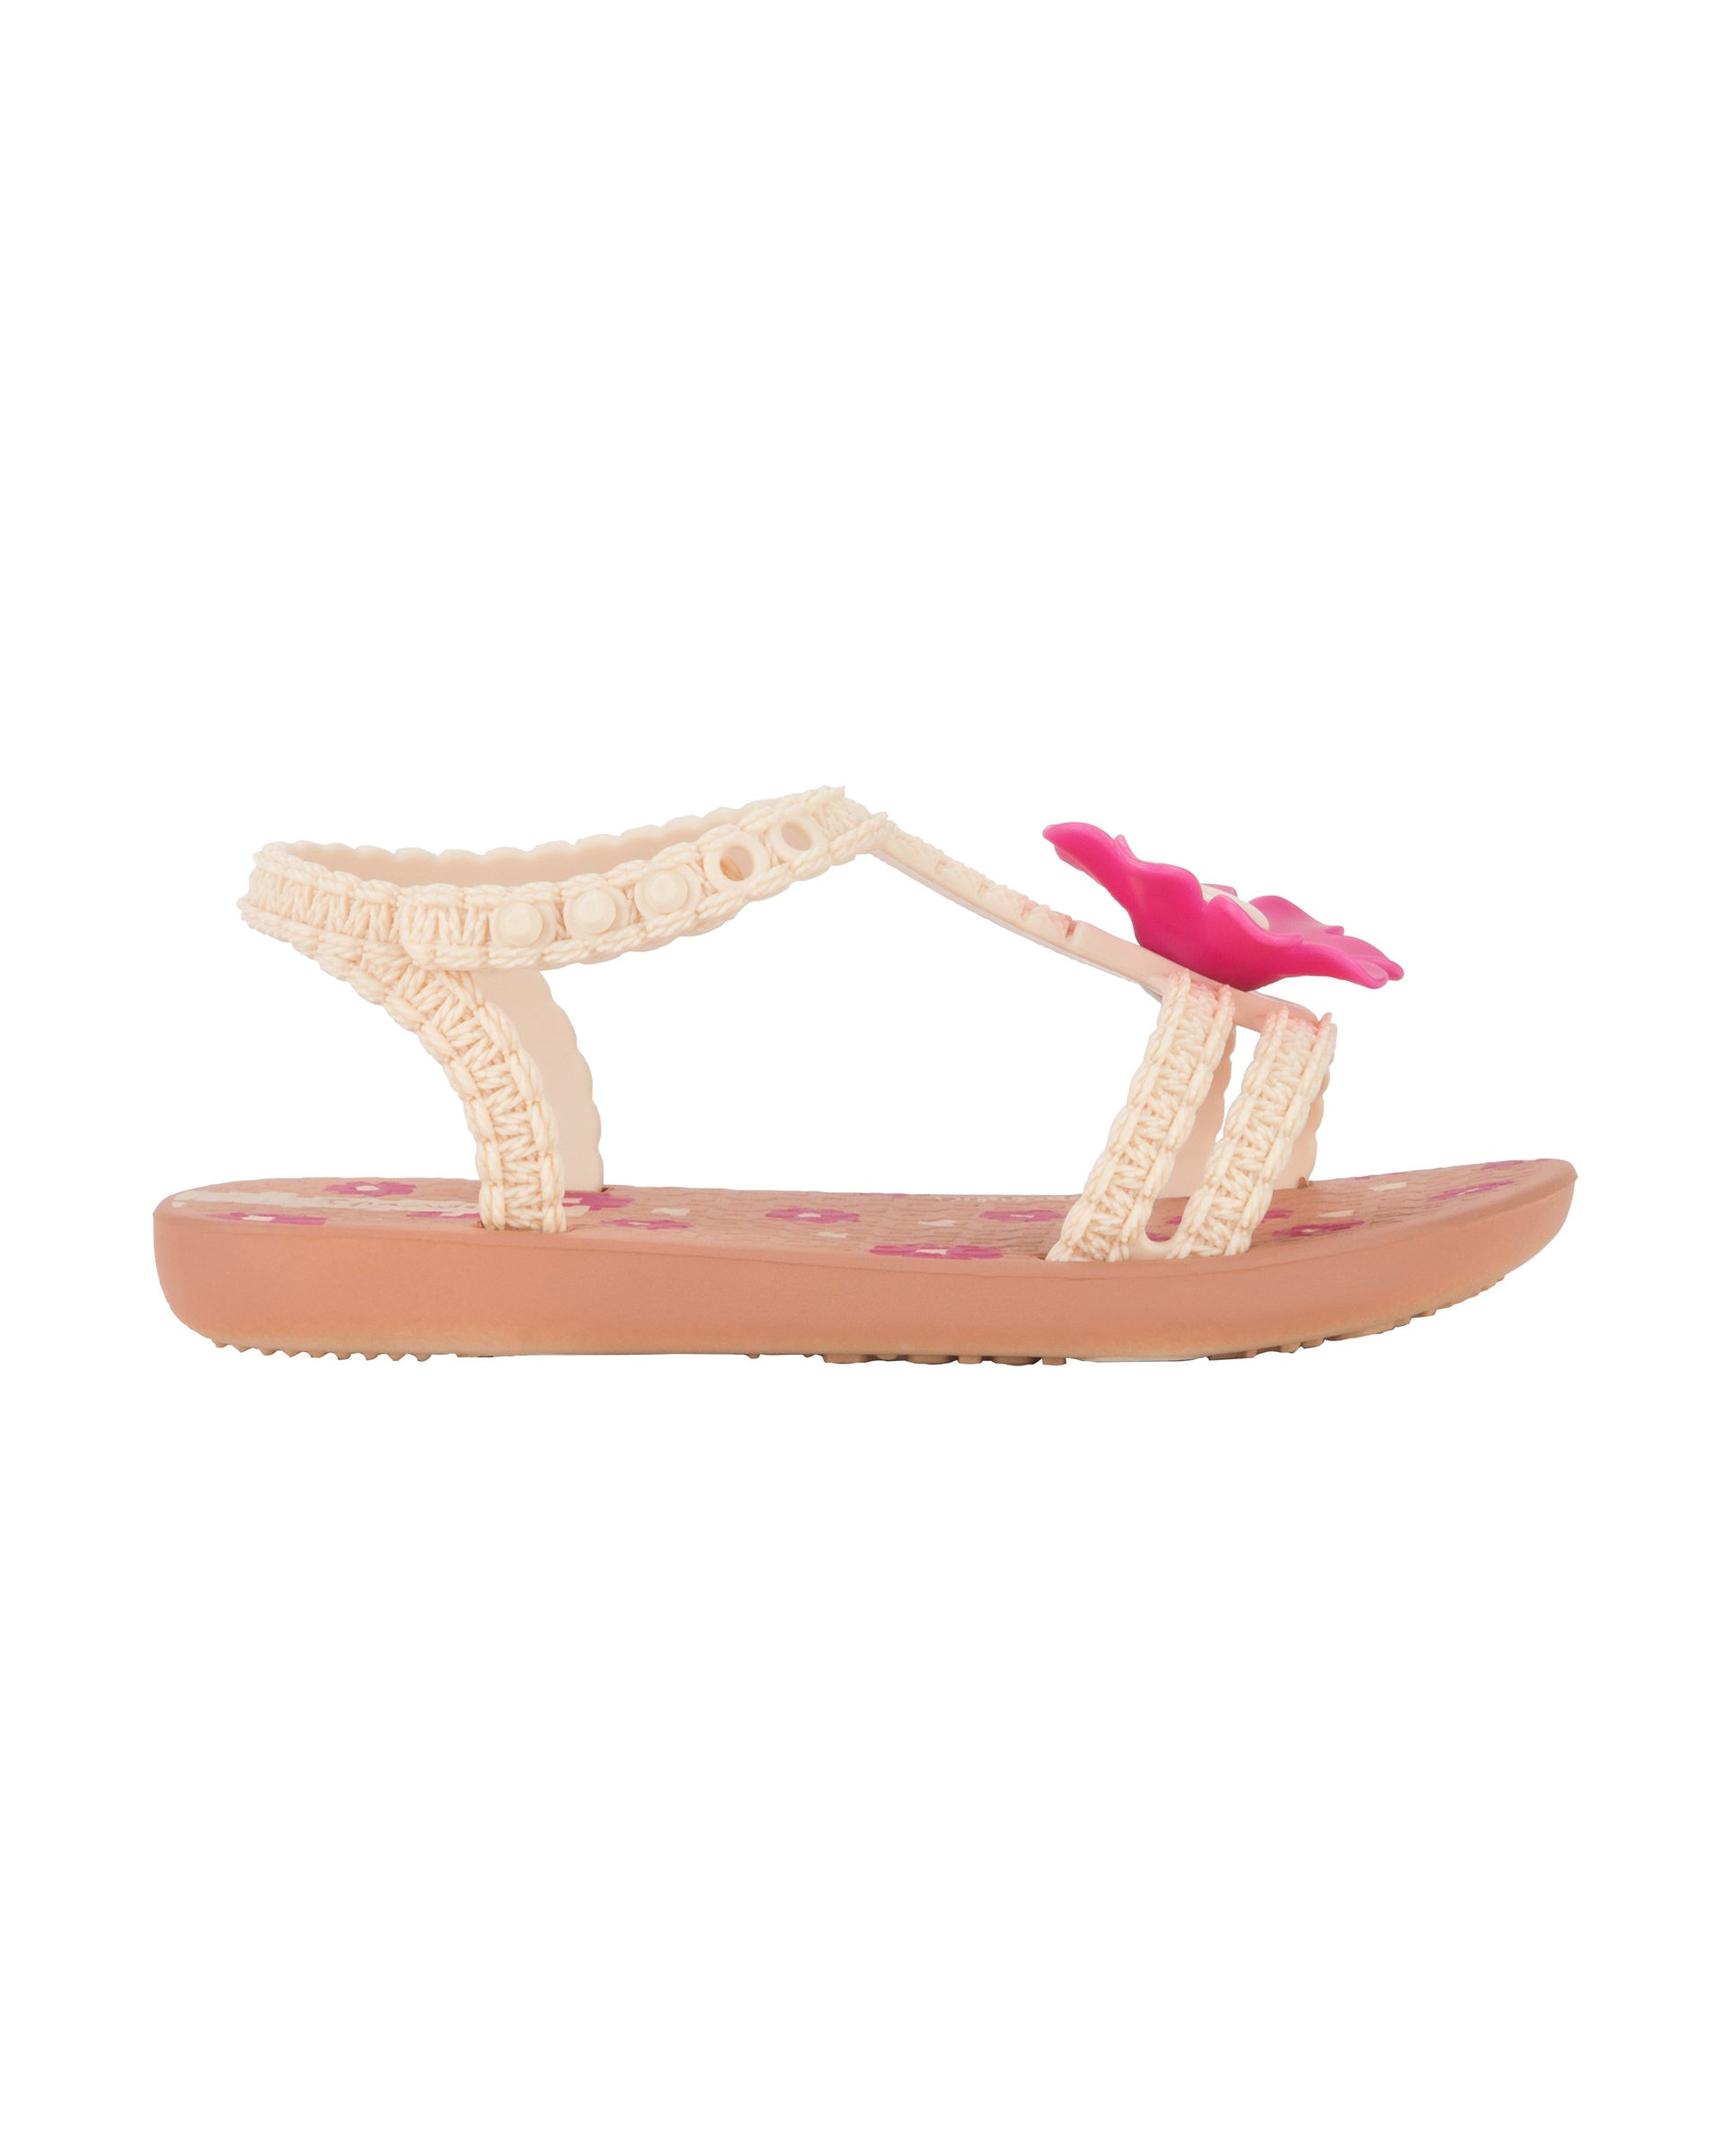 Outer side view of a pink Ipanema Daisy baby sandal with pink flower on top and crochet texture .